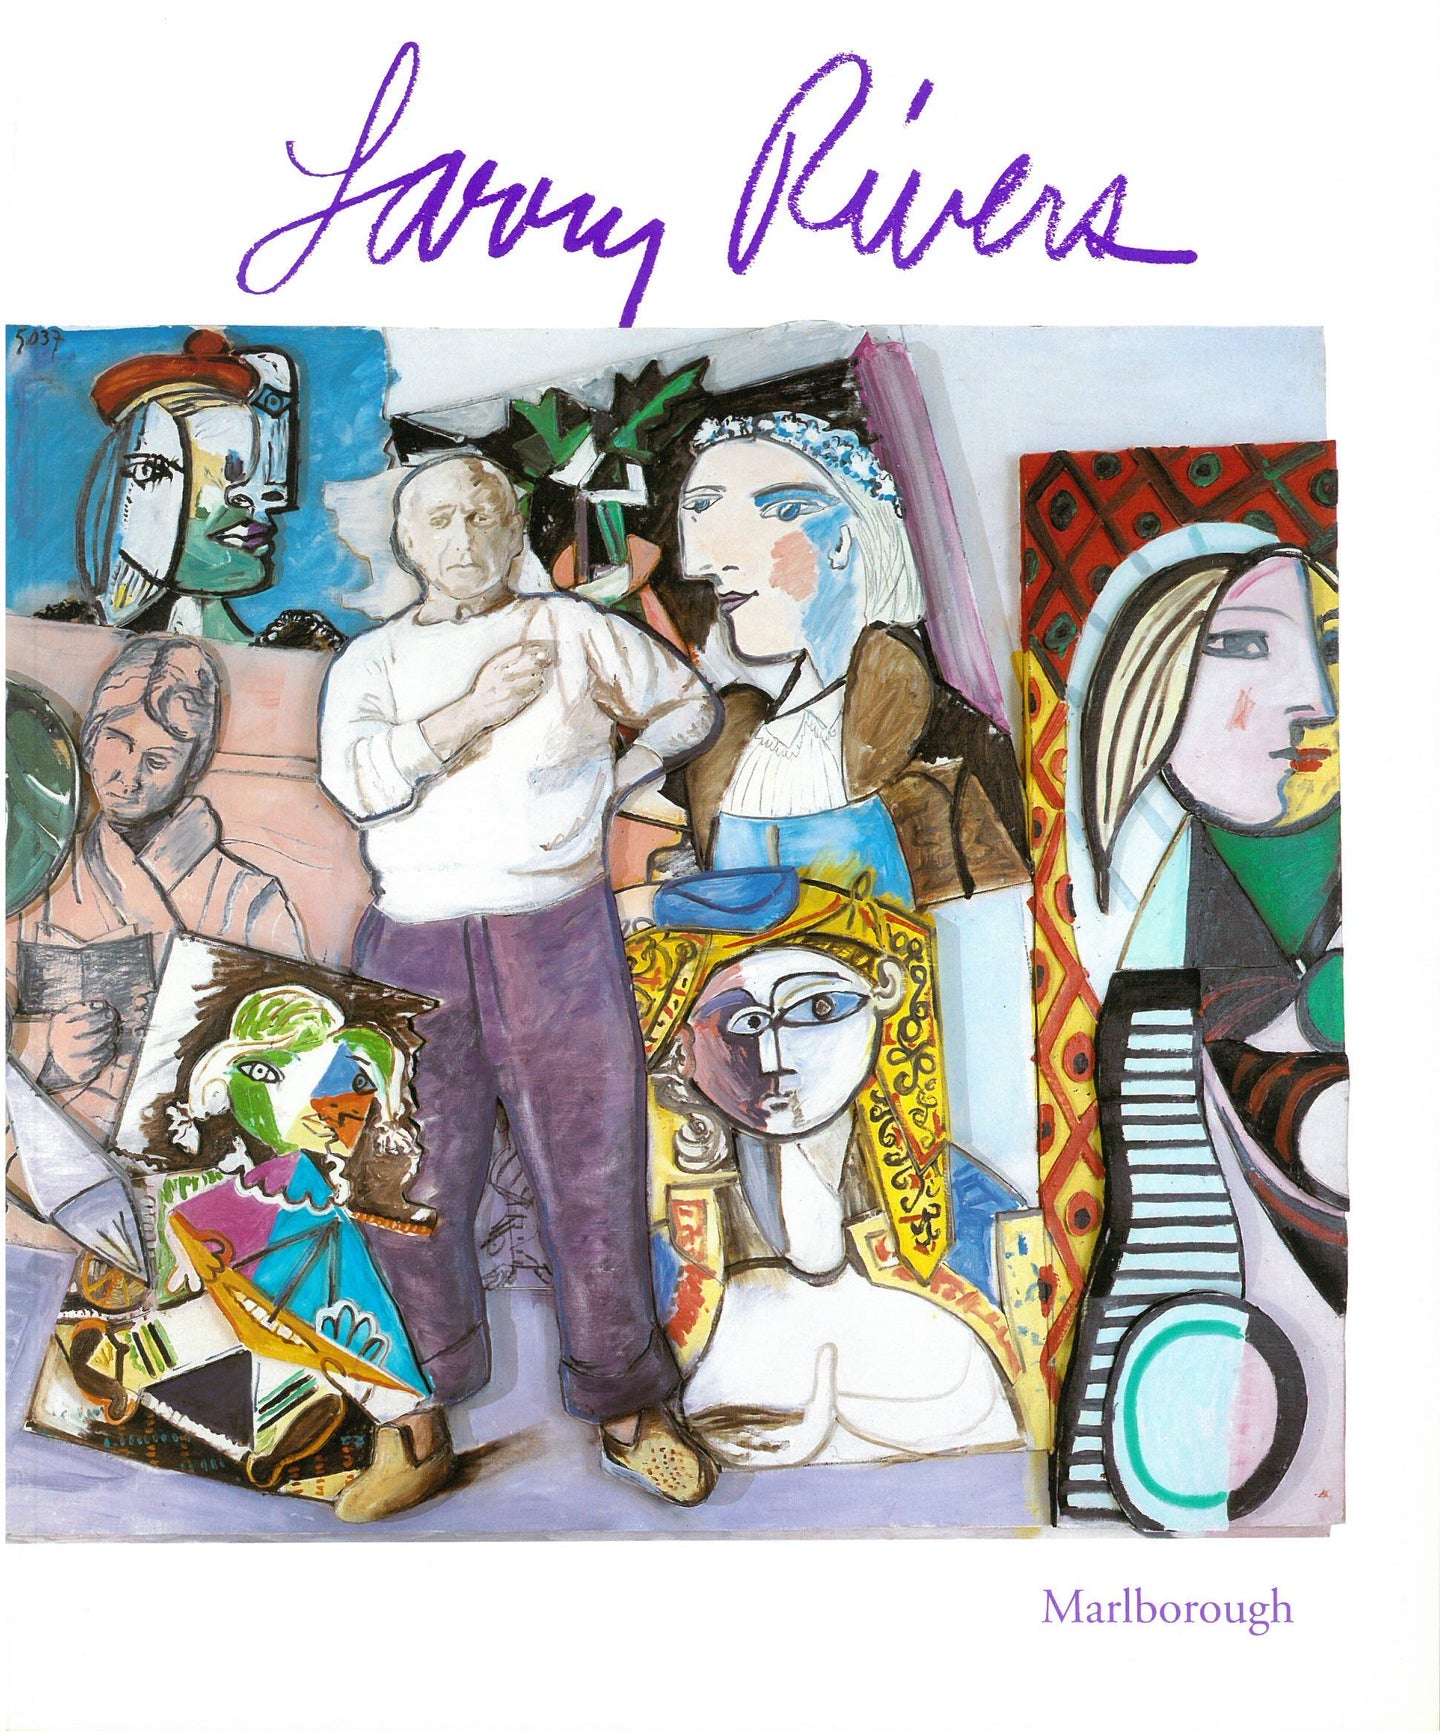 Rivers catalogue cover which features a painting of several cubist figures and a male figure standing in front